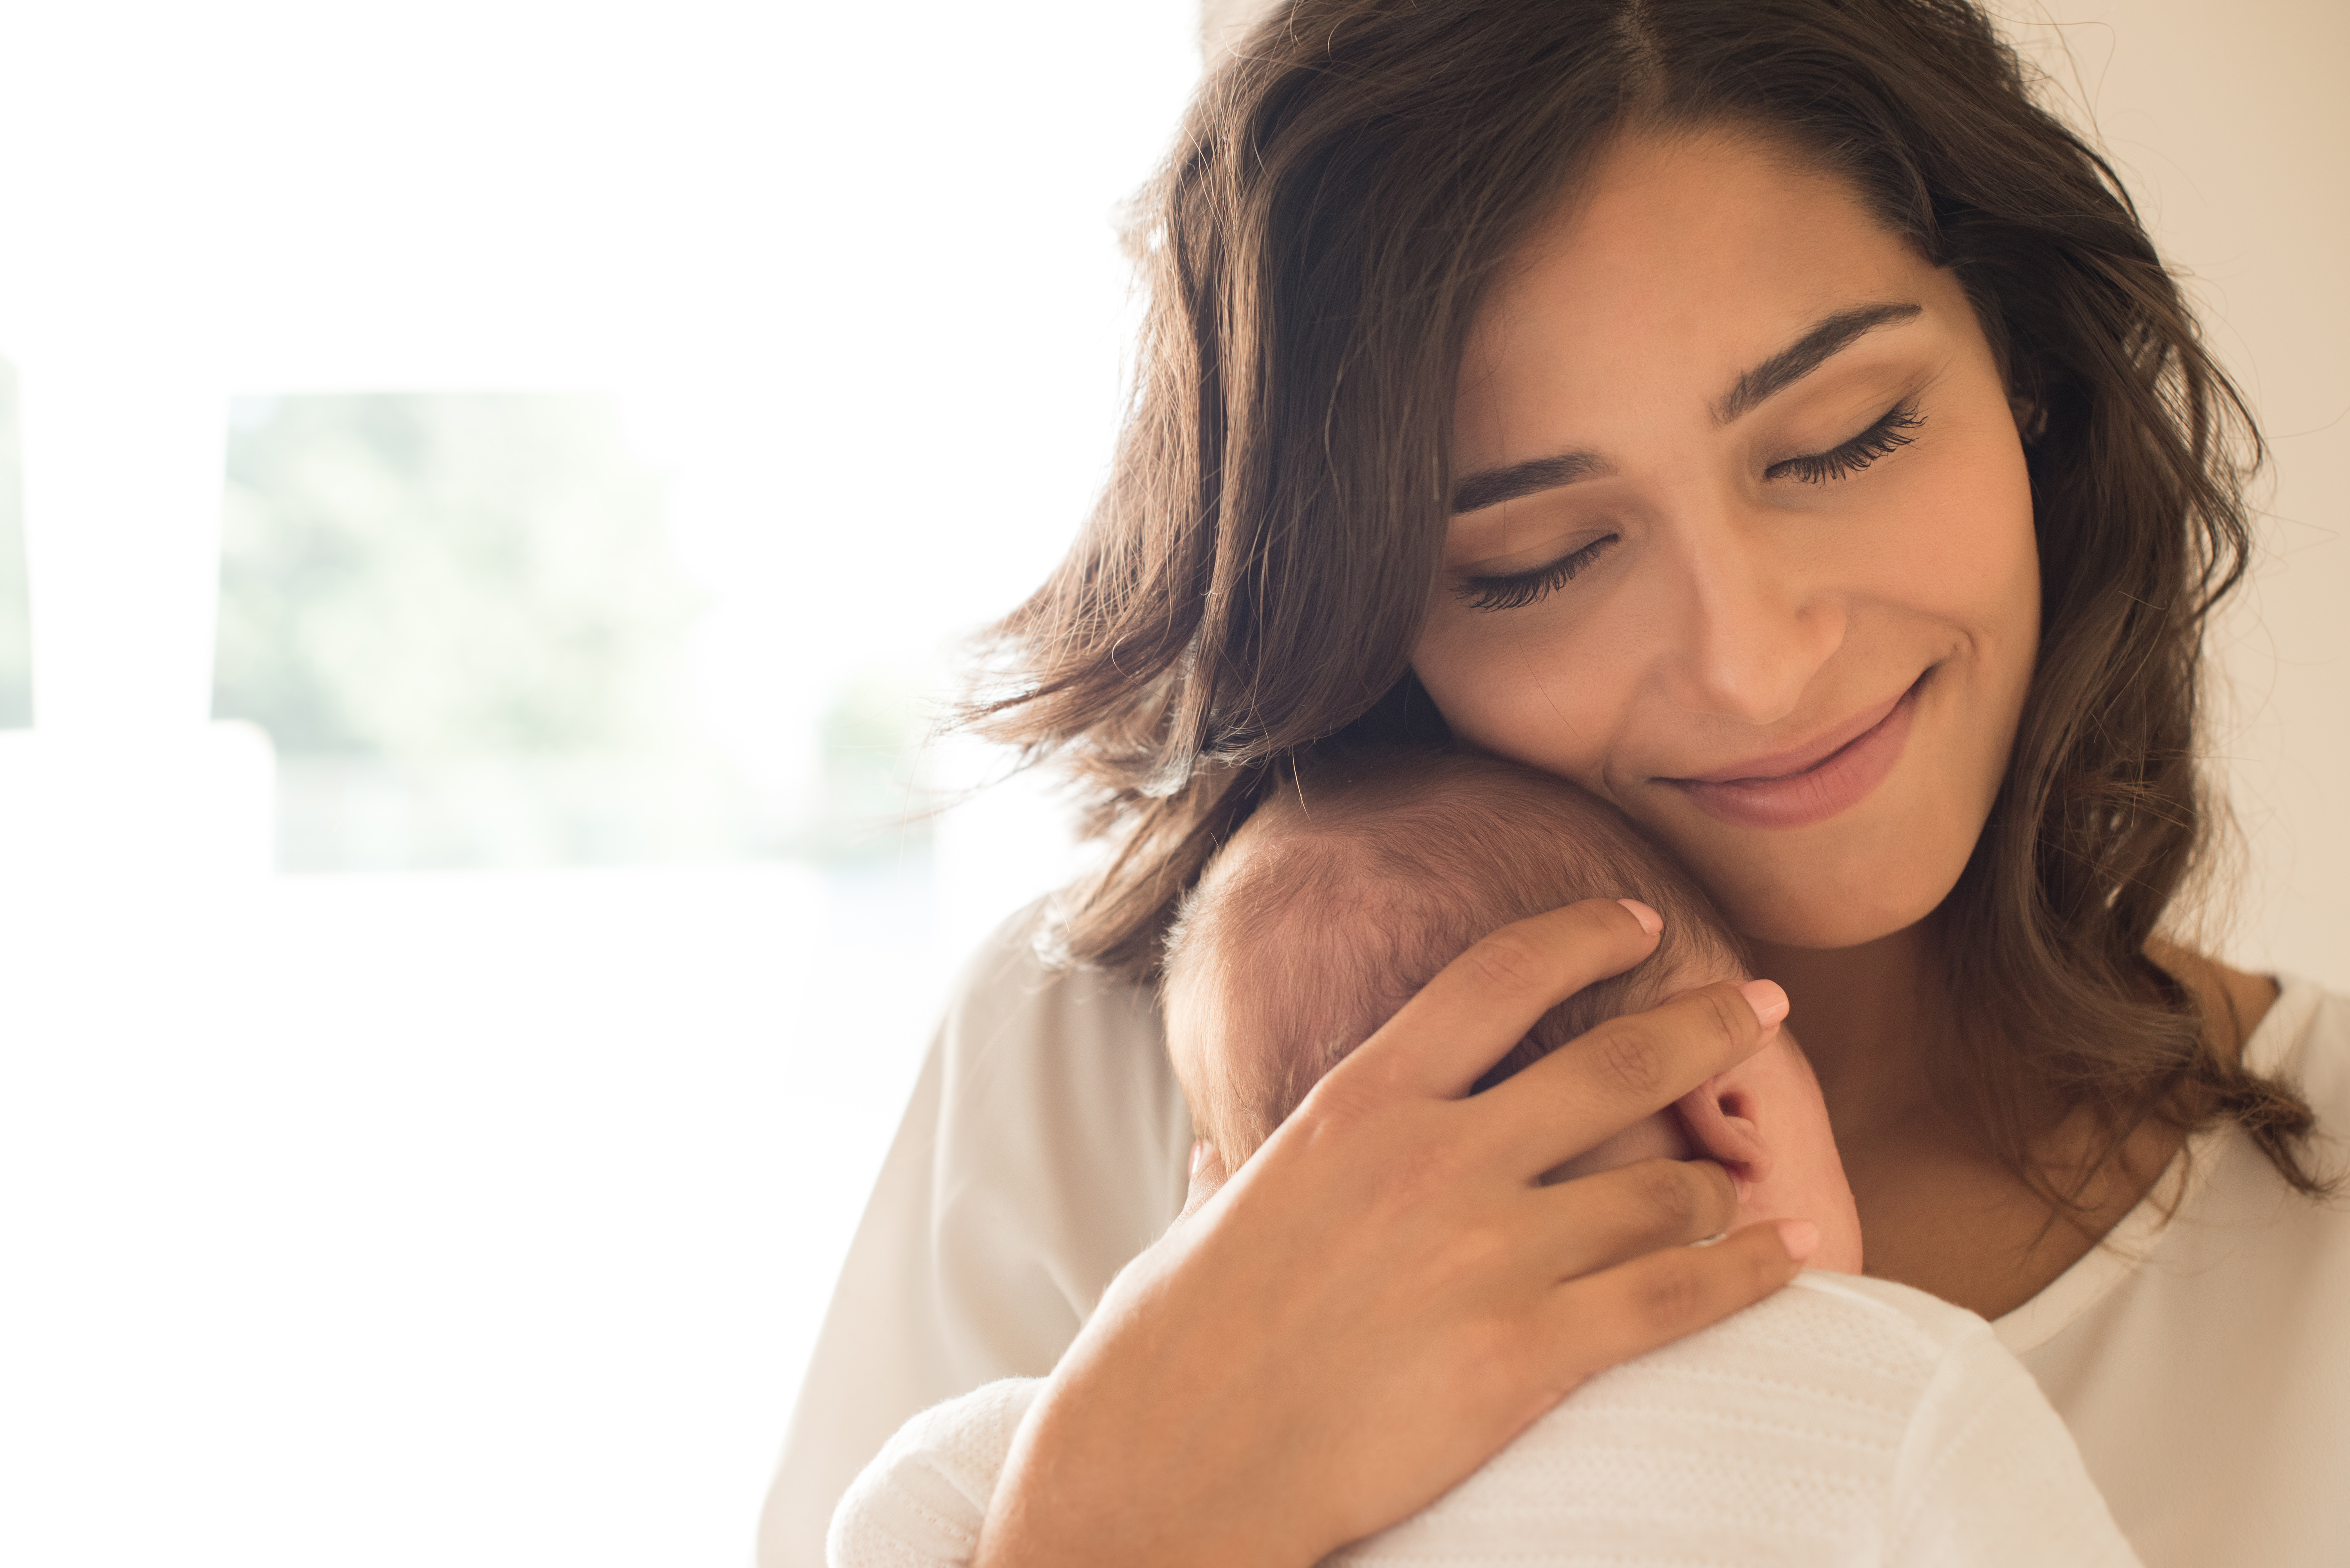 A mother smiling while snuggling her baby to her chest | Source: Shutterstock